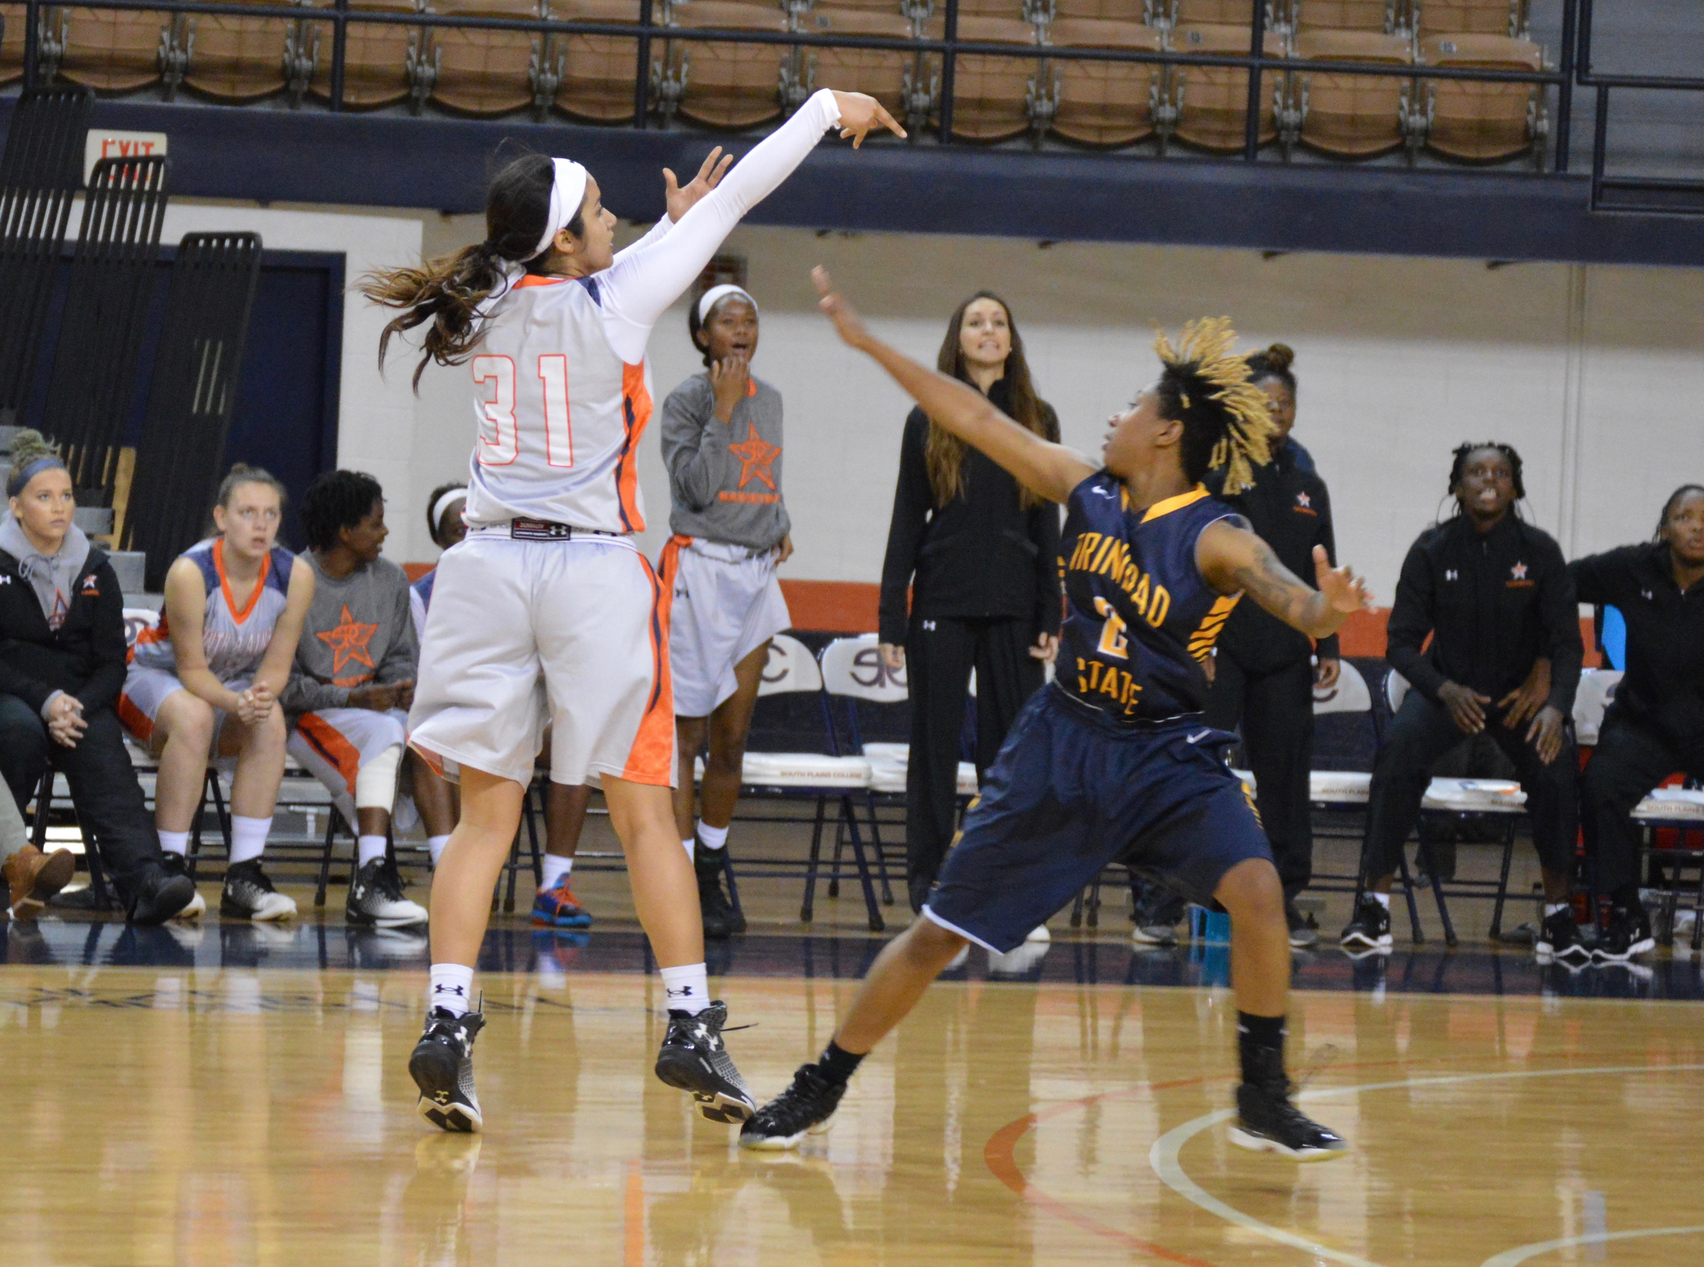 Lady Texans rout Trinidad State behind Lloyds double-double